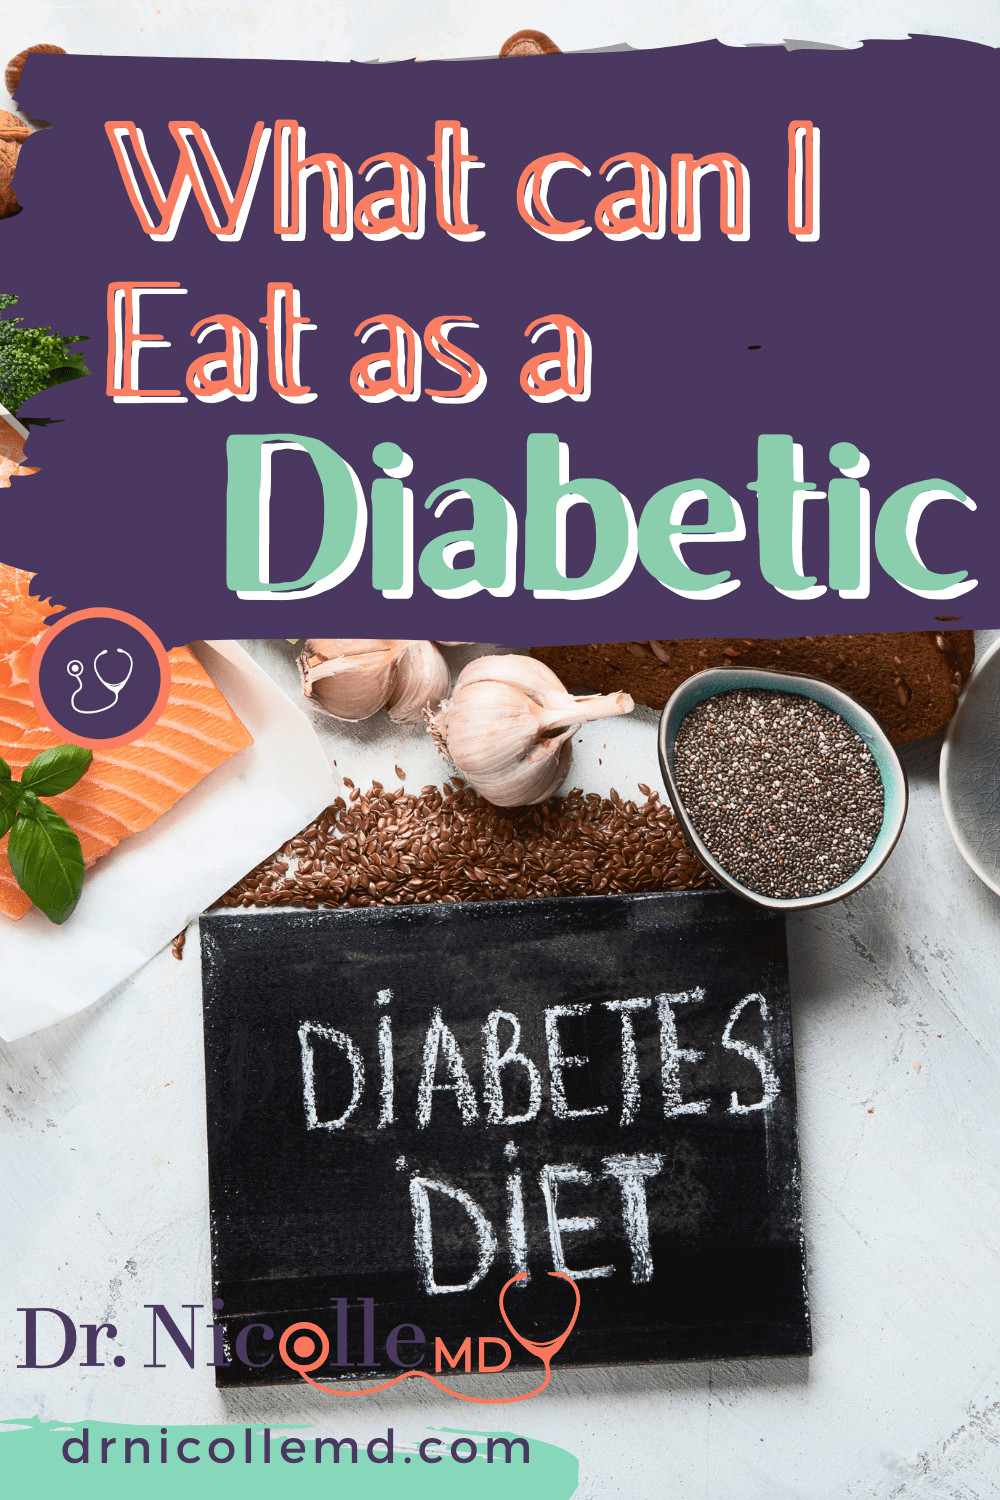 What Can I Eat as a Diabetic?